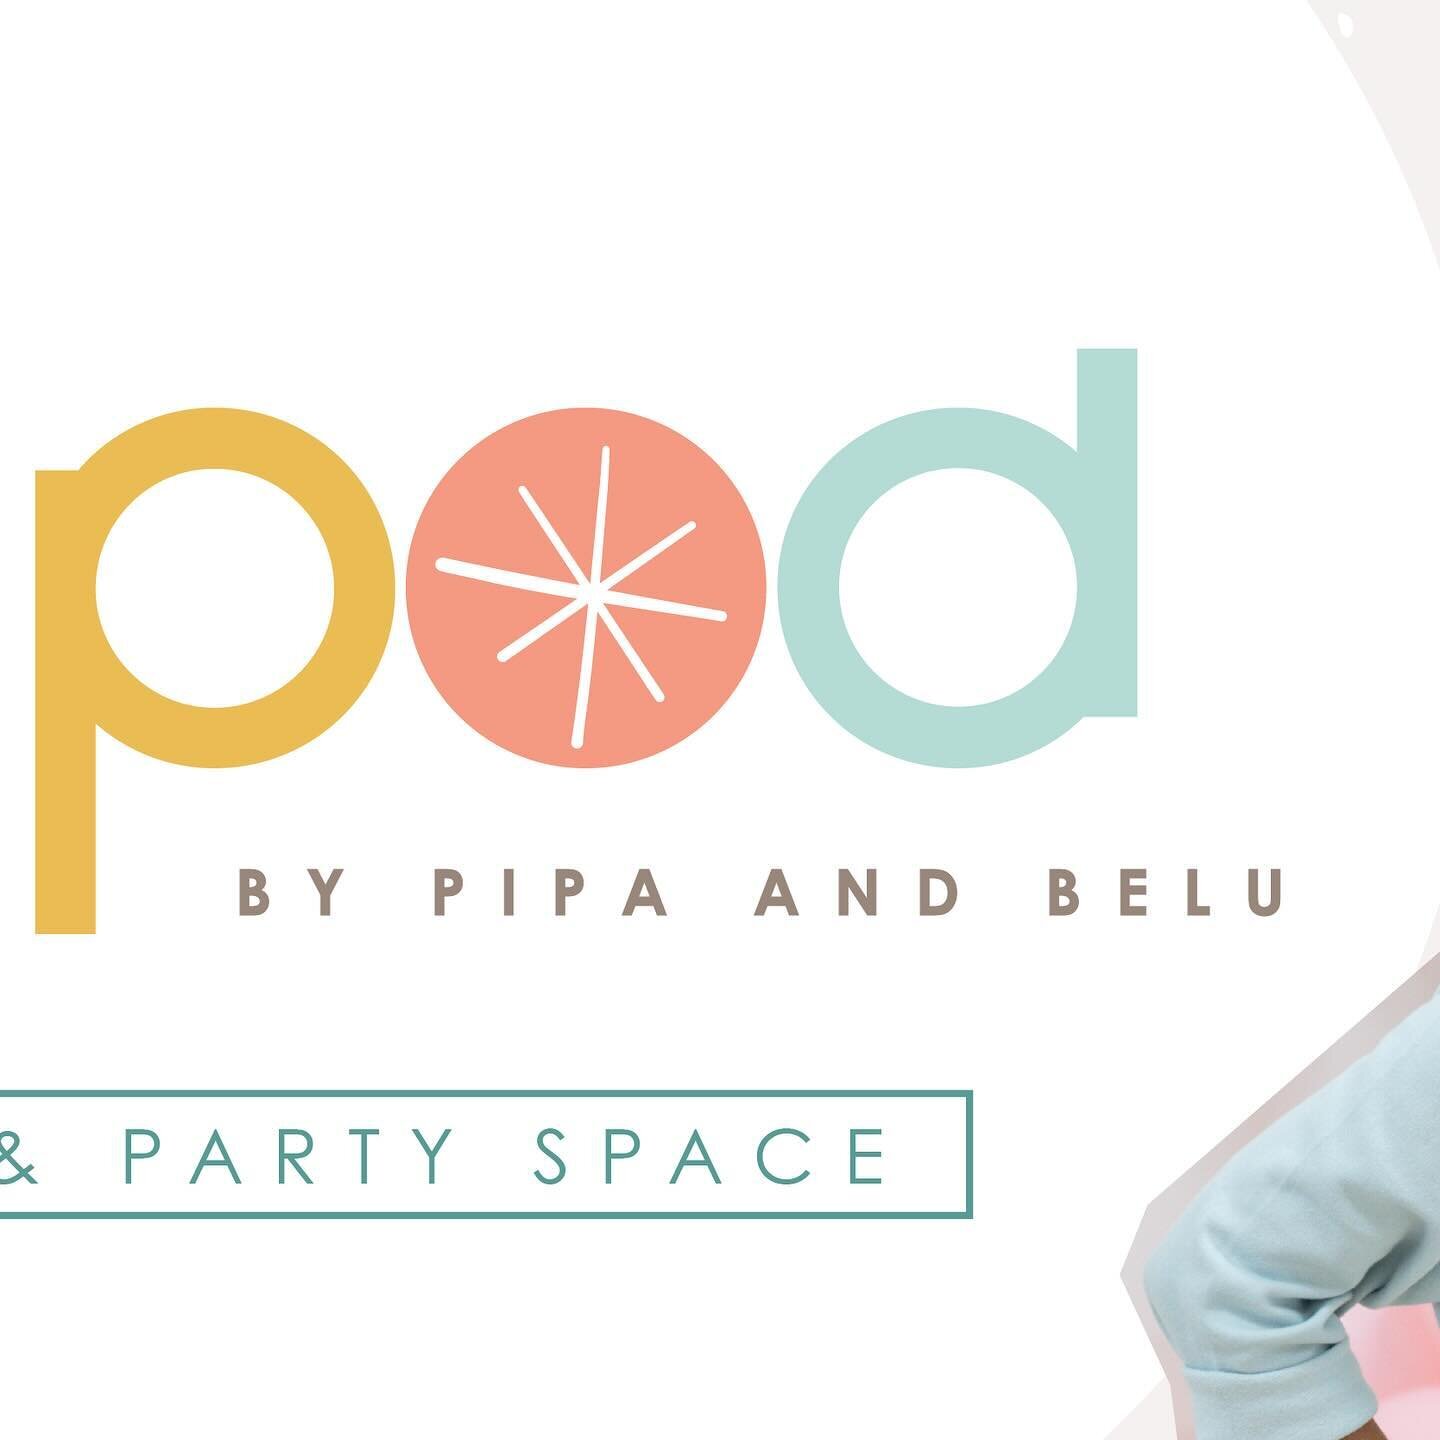 Our newest adventure is coming soon: @playpodmiami

A modern indoor baby playground and party space designed for babies and toddlers ages 1-5 by @pipaandbelu. Inspired by the Montessori and Reggio Emilia philosophies.

Our dream come true!!

We&rsquo